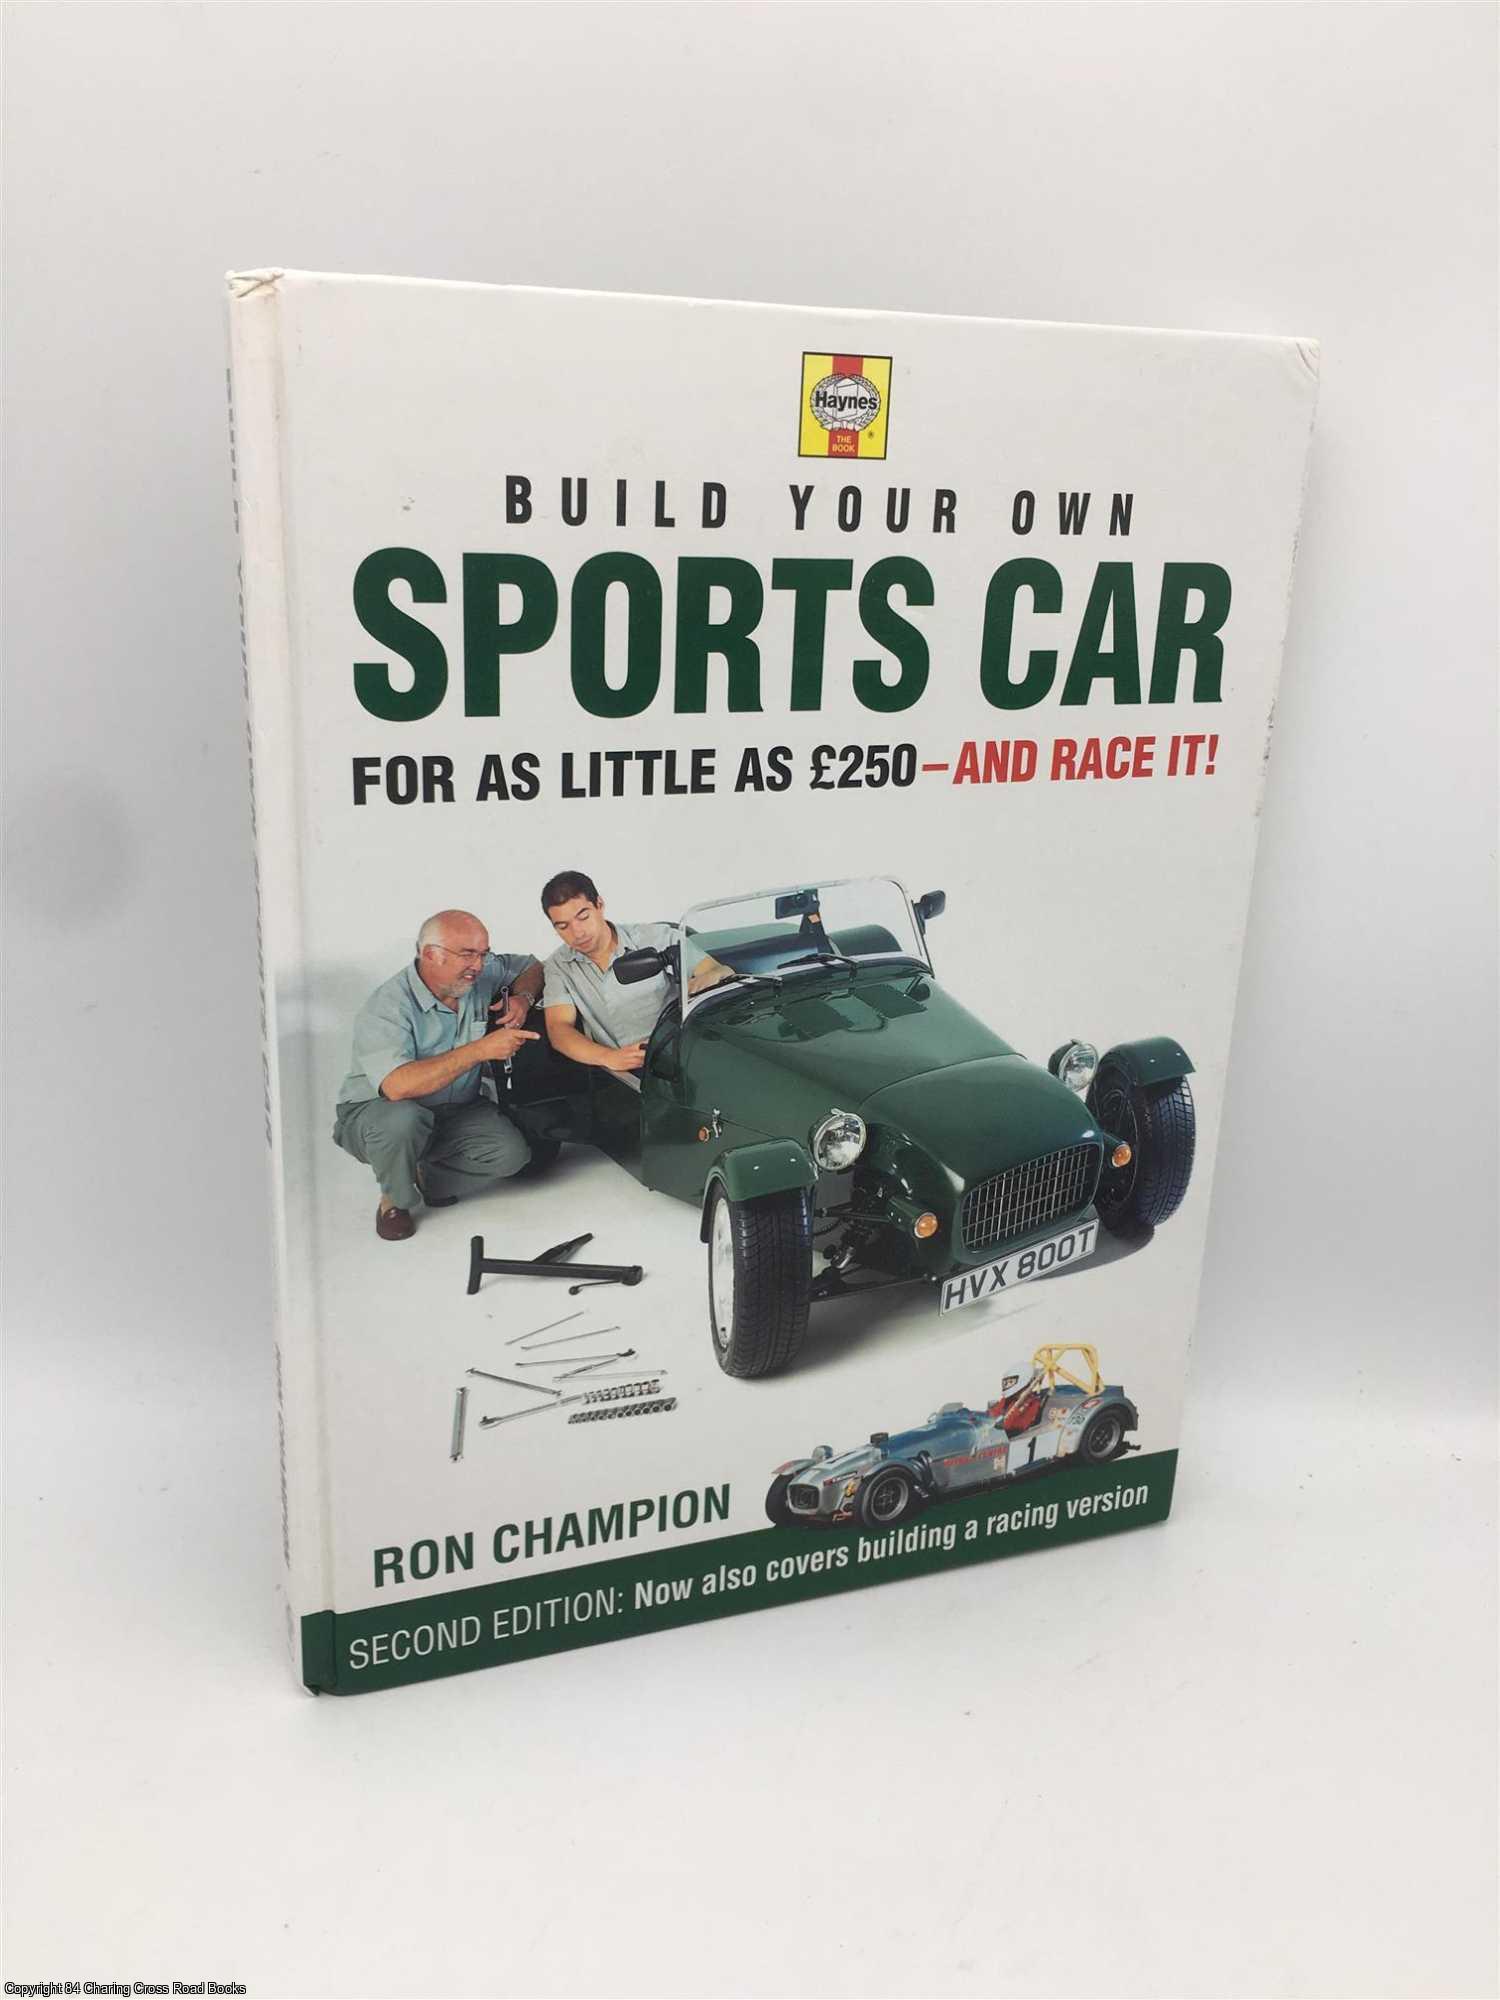 Little　£250　Champion　Car　Own　Sports　and　Ed　Race　for　Edition　It!,　as　as　2nd　Build　Second　Your　Ron